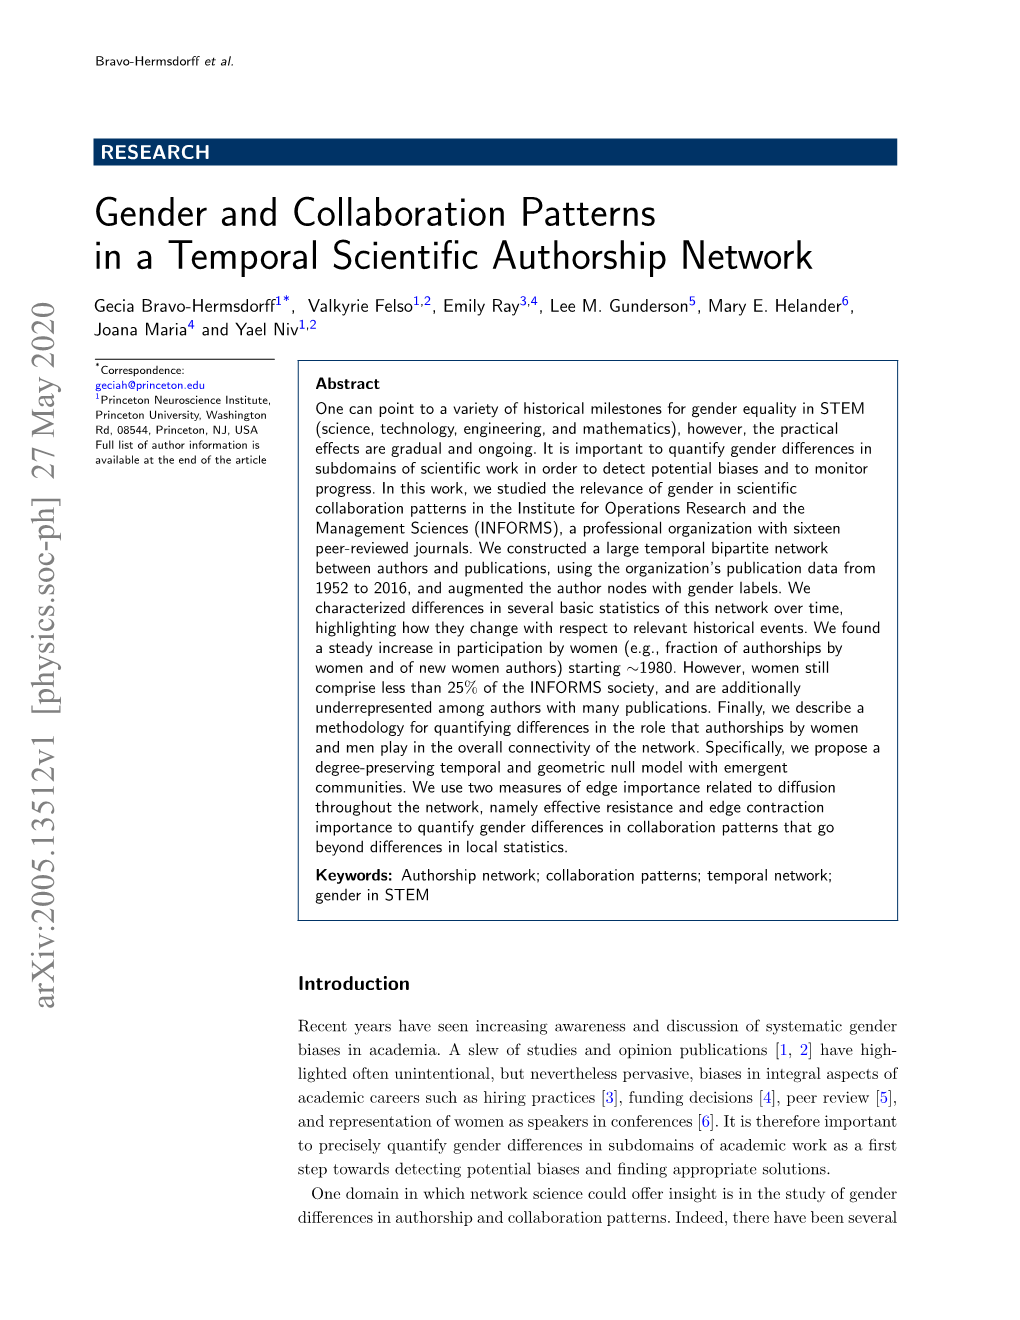 Gender and Collaboration Patterns in a Temporal Scientific Authorship